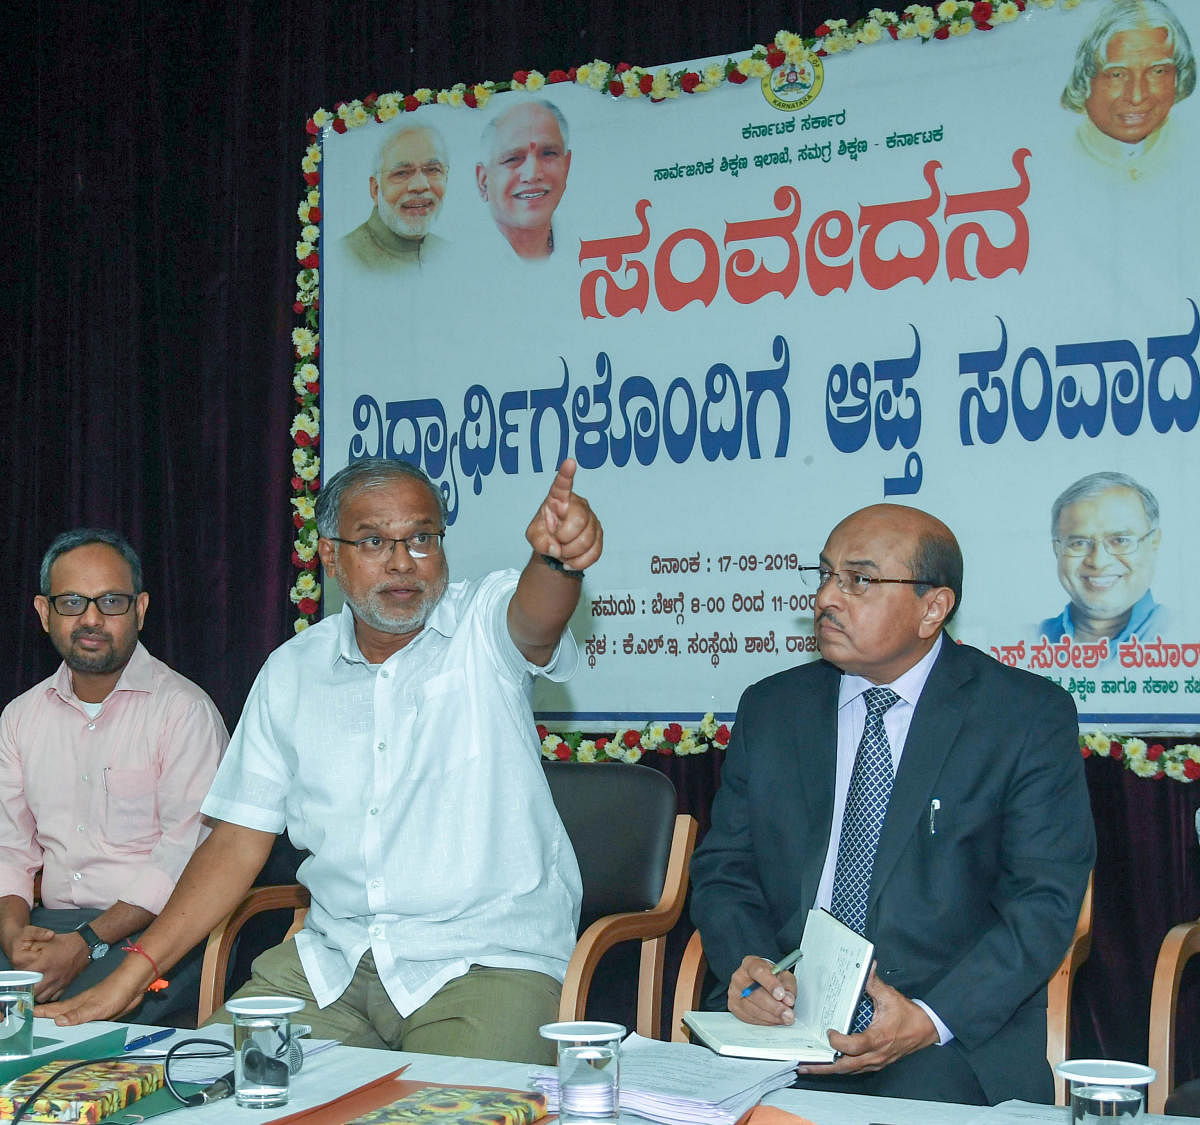 The minister gestures at the programme. Educationist Gururaj Karajagi (extreme right) is also seen.